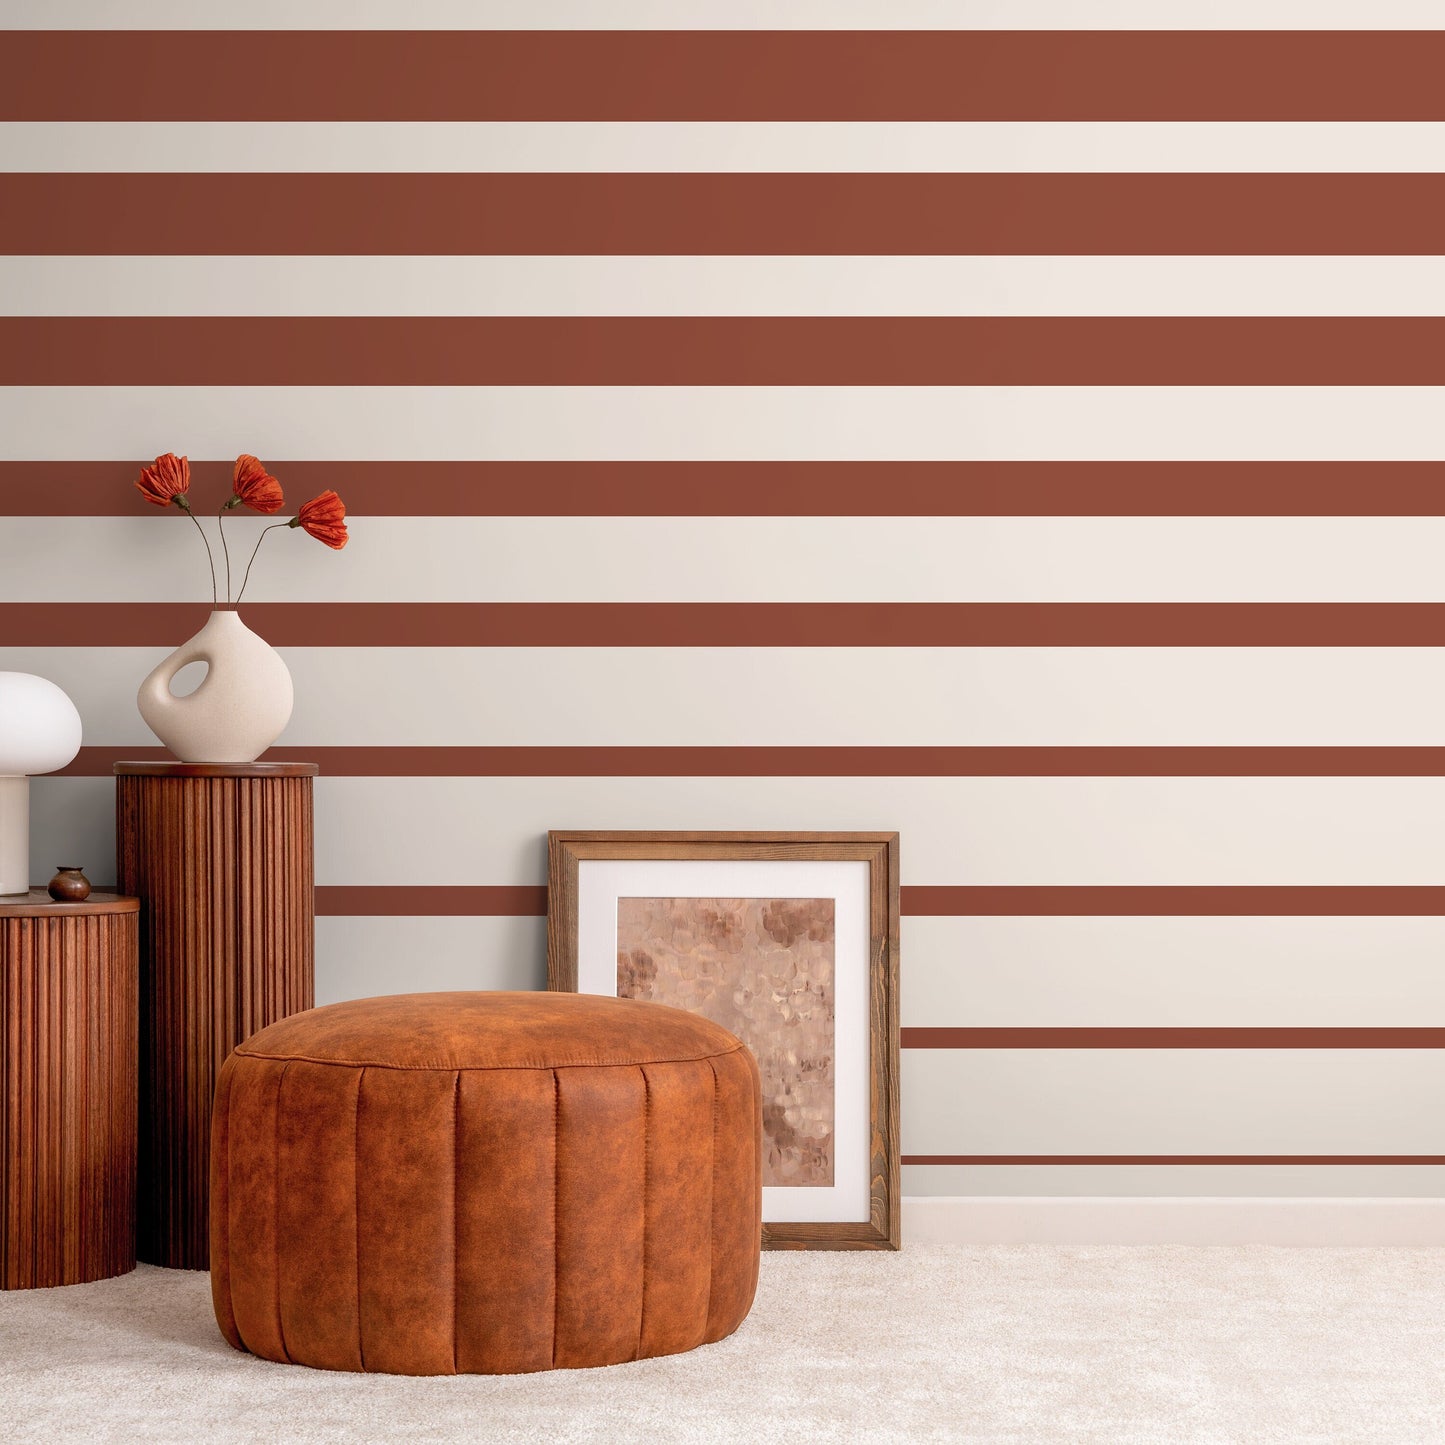 Terracotta Striped Wallpaper Modern Wallpaper Peel and Stick and Traditional Wallpaper - D728